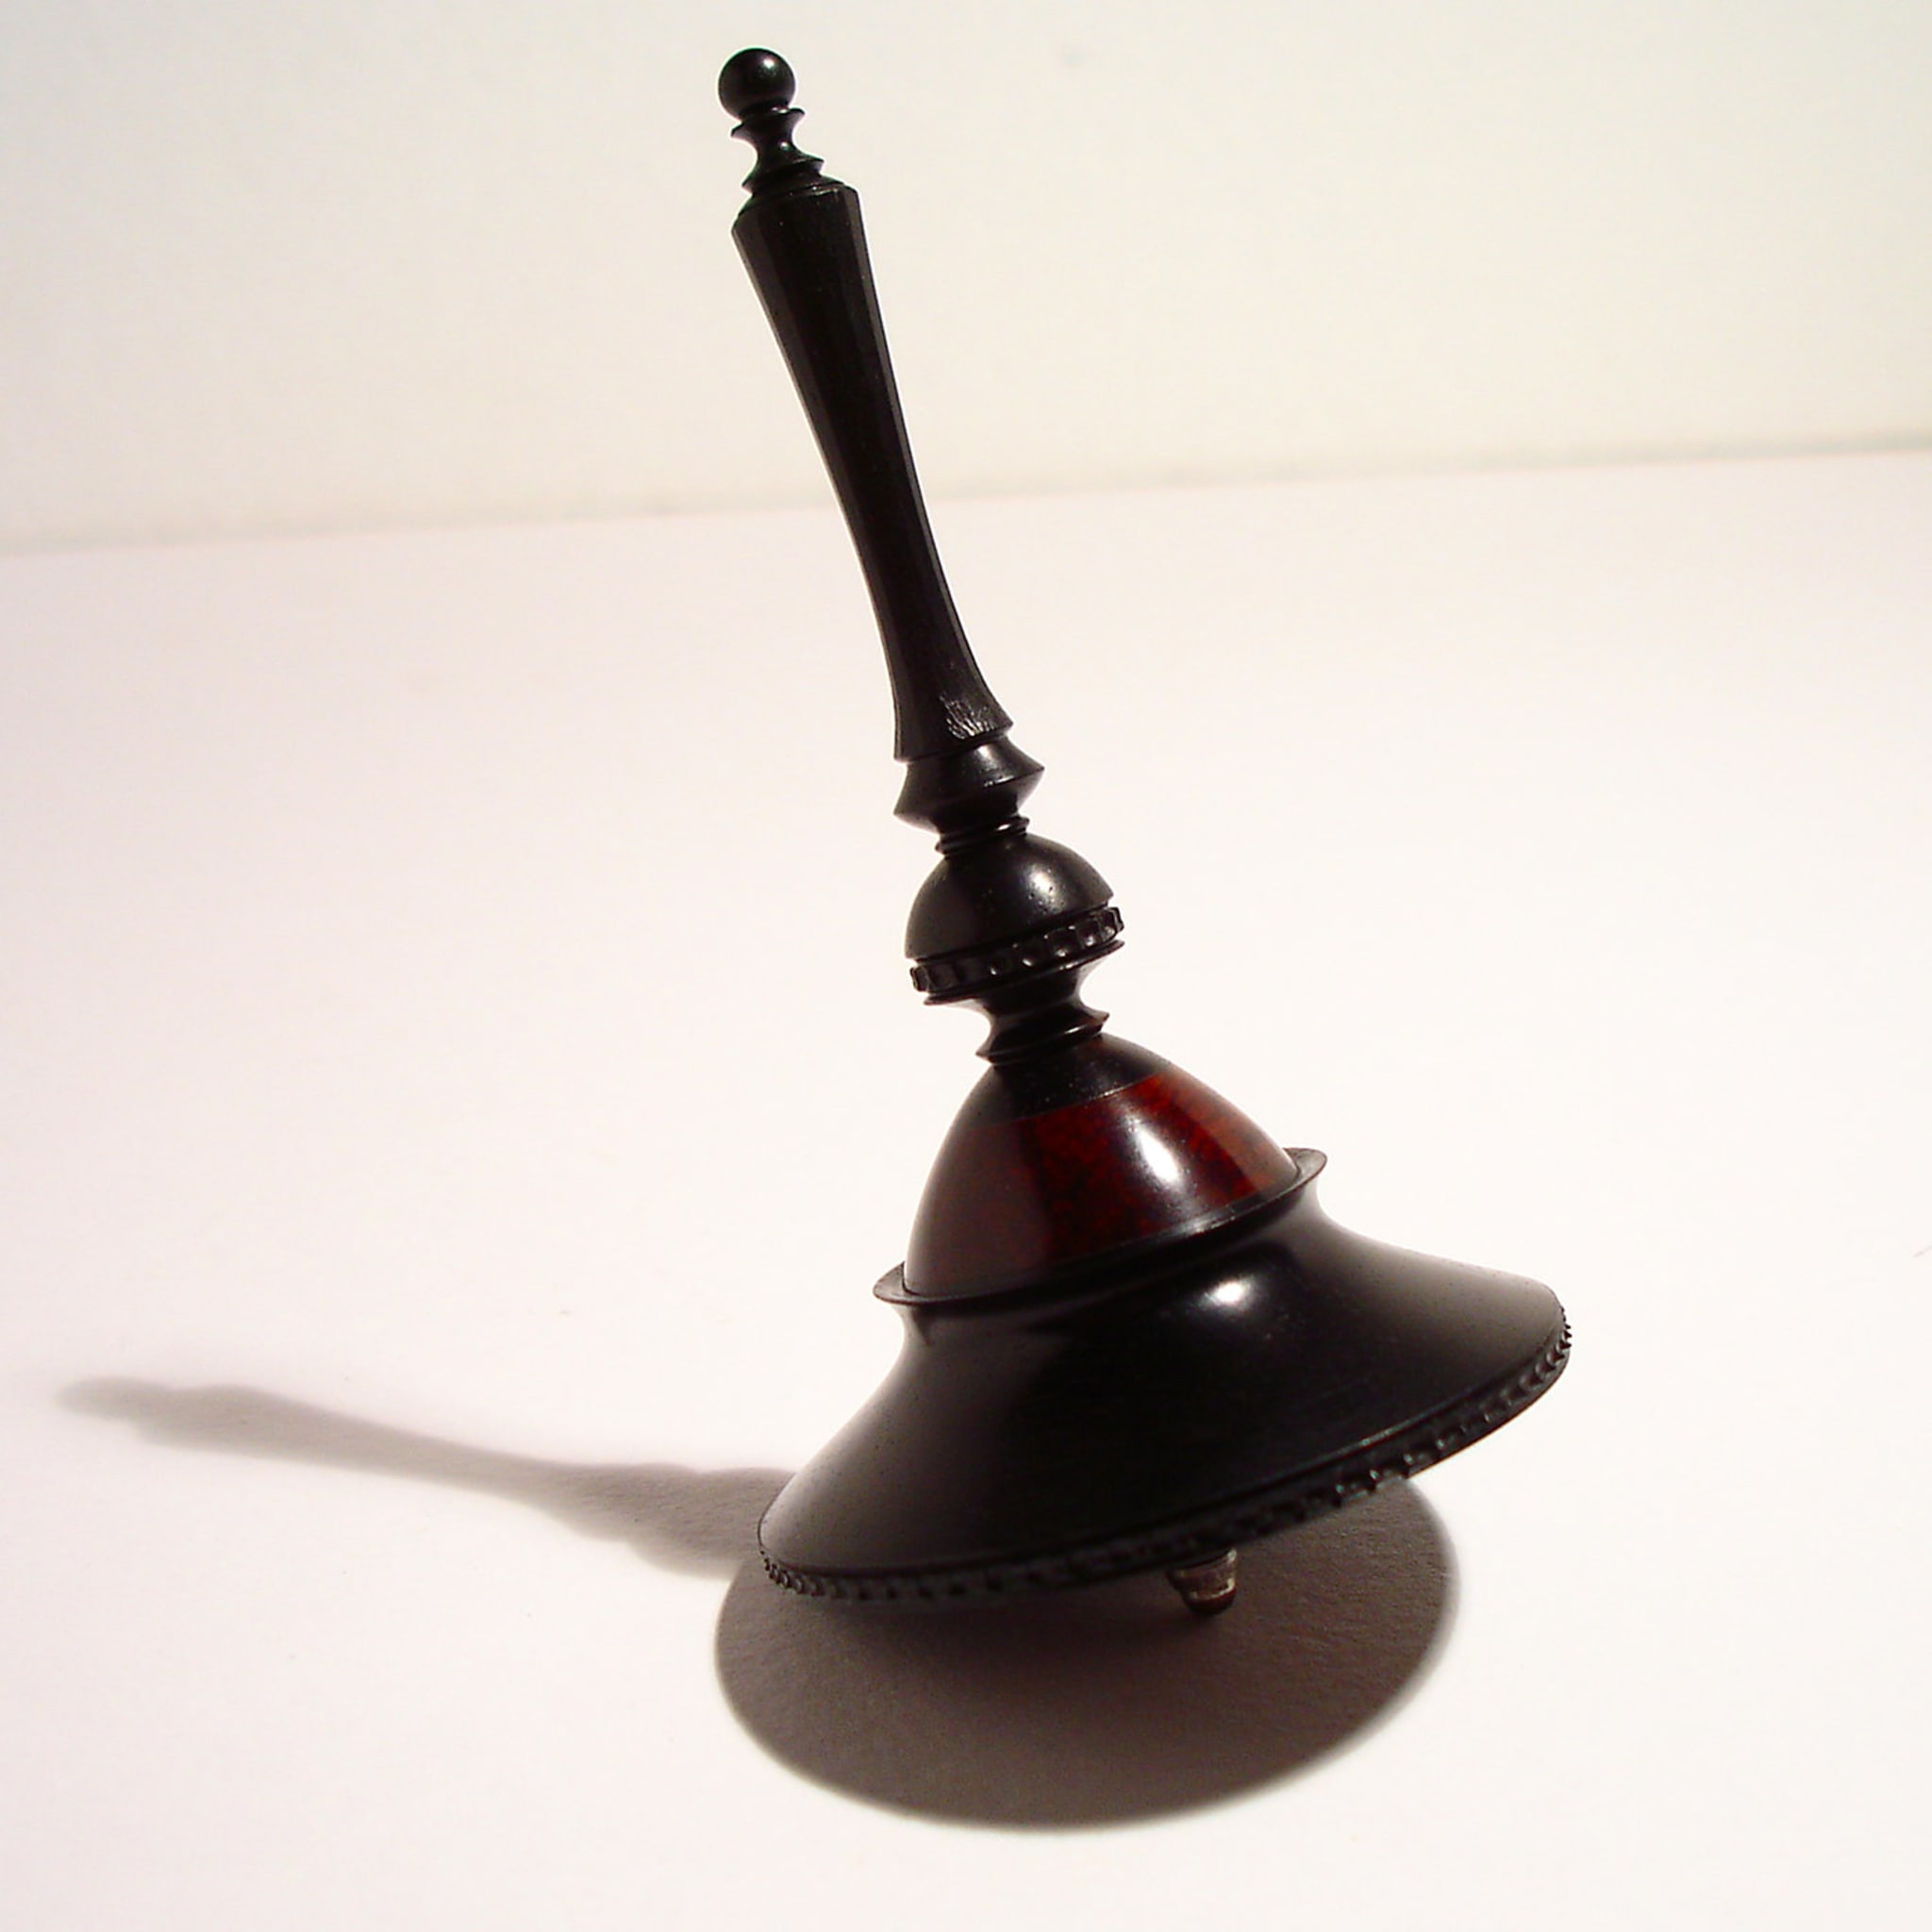 DarkStyle Spinning Top in Ebony and Snakewood - Alternative view 1